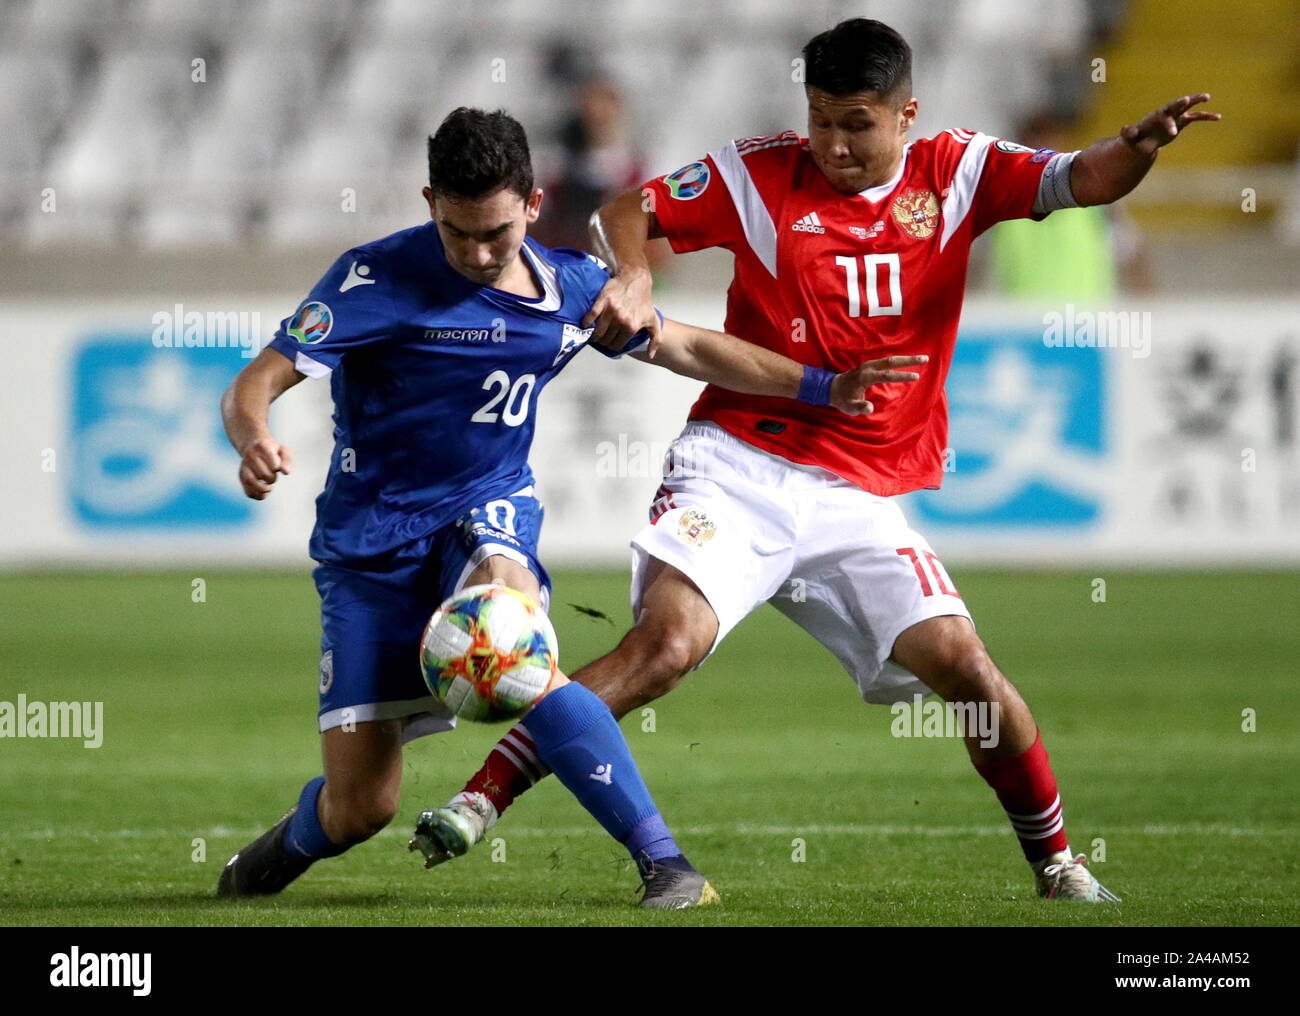 Cyprus. 13th Oct, 2019. NICOSIA, CYPRUS - OCTOBER 13, 2019: Cyprus' Ioannis  Kosti (L) and Russia's Ilzat Akhmetov fight for the ball in the 2020 UEFA  Euro Qualification Round Group I football